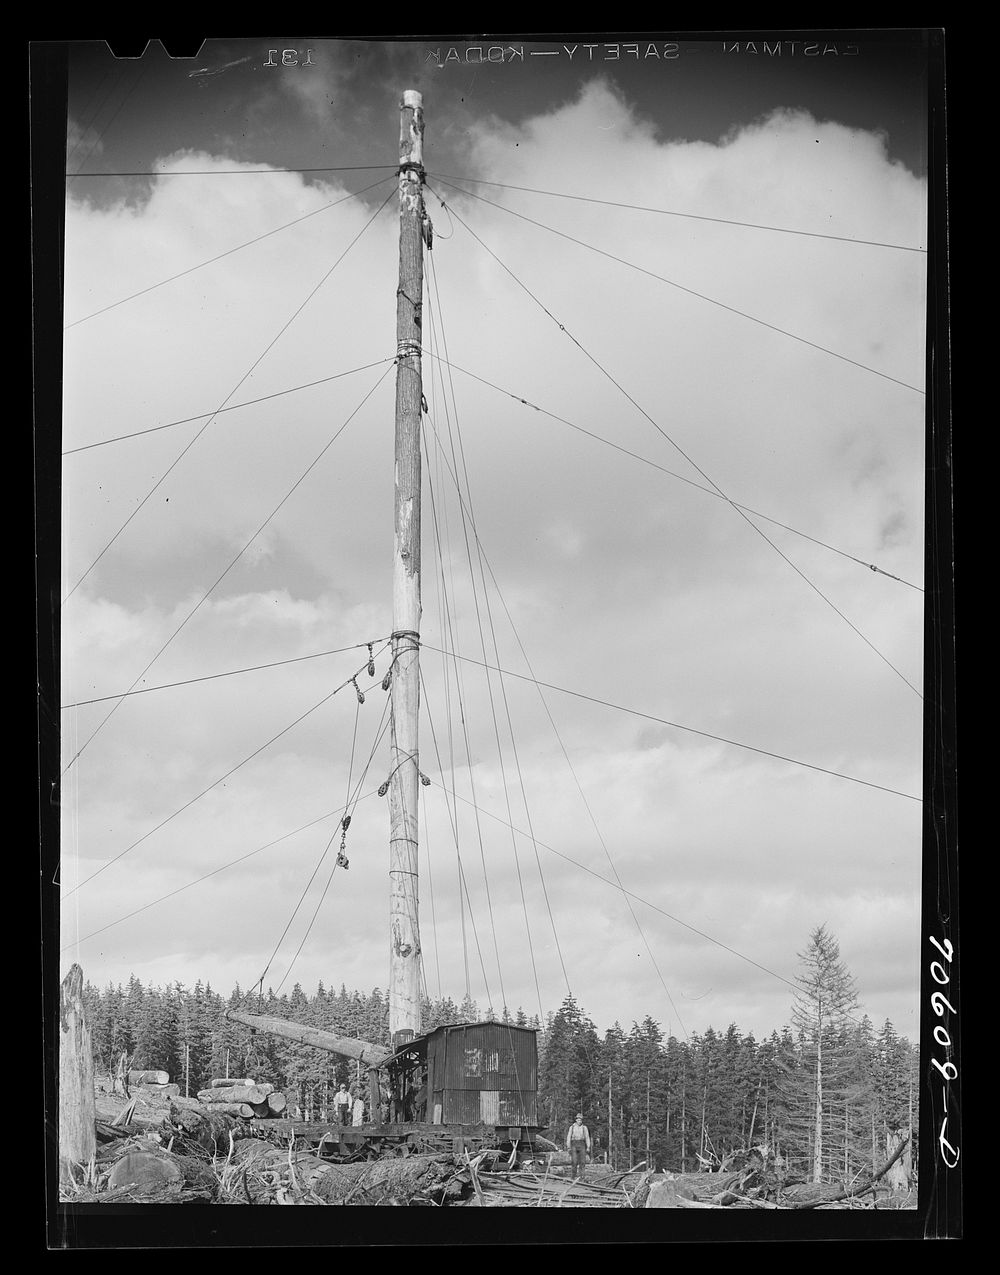 [Untitled photo, possibly related to: Long Bell Lumber Company, Cowlitz County, Washington. Spar tree used in lumbering…